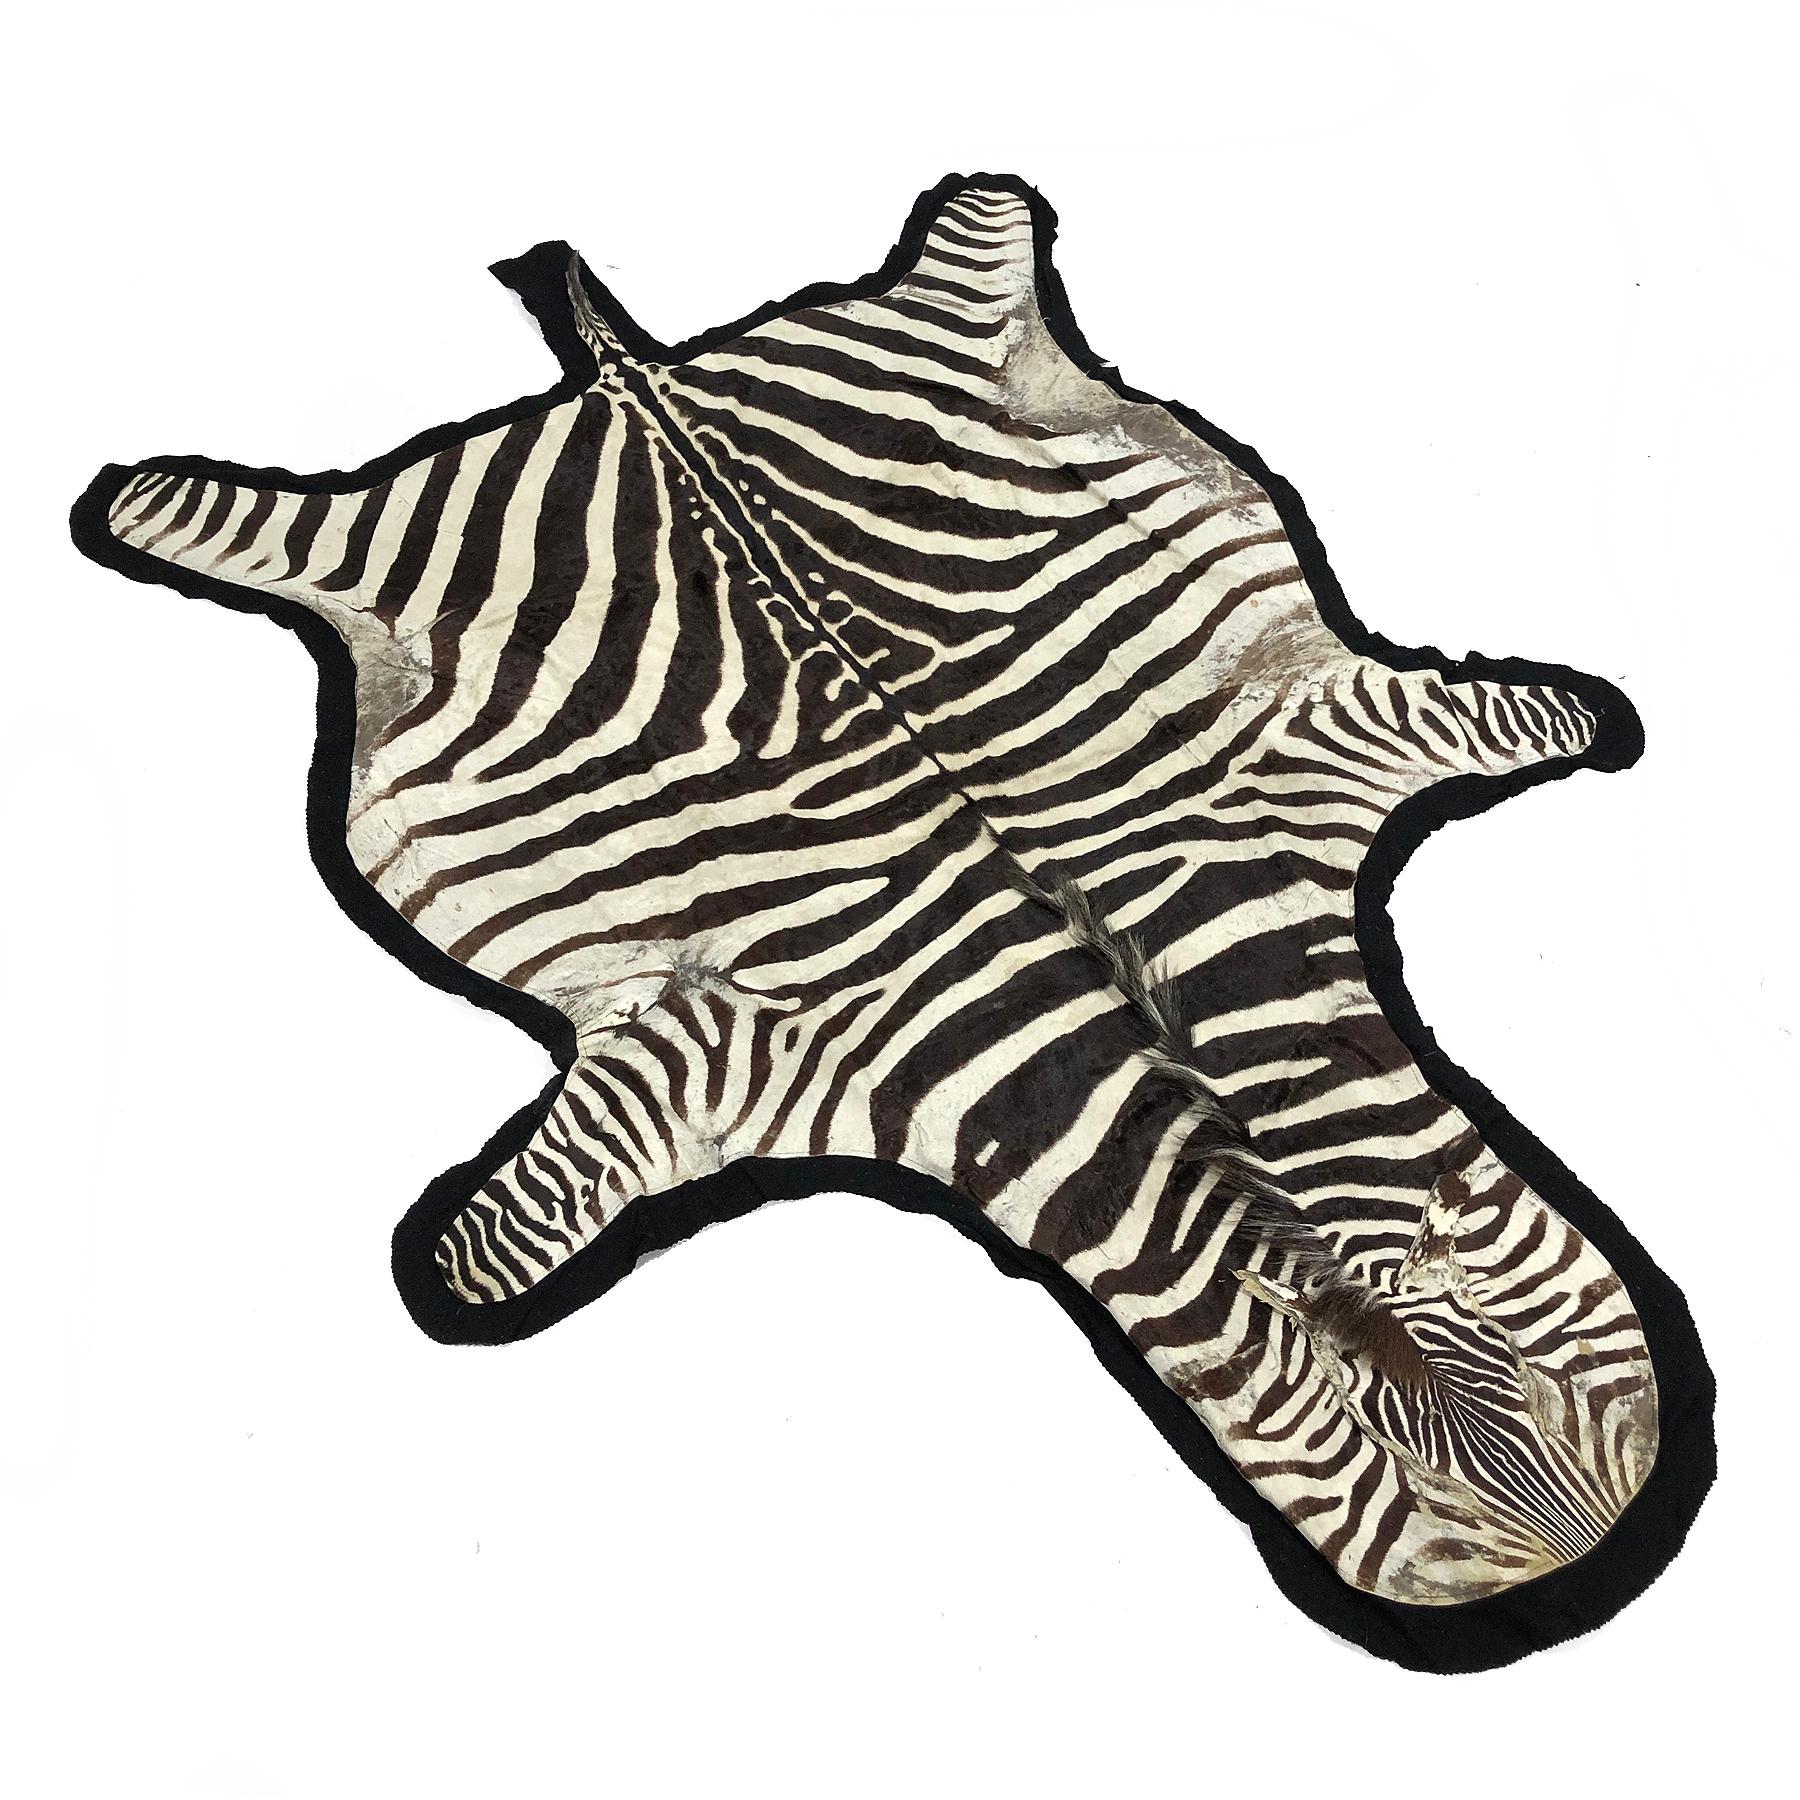 A fantastic vintage rug, this zebra hide is fully backed with black felt. It has particularly beautiful markings, a Fine mane, and shows a pleasing patina and wear appropriate for it's age.